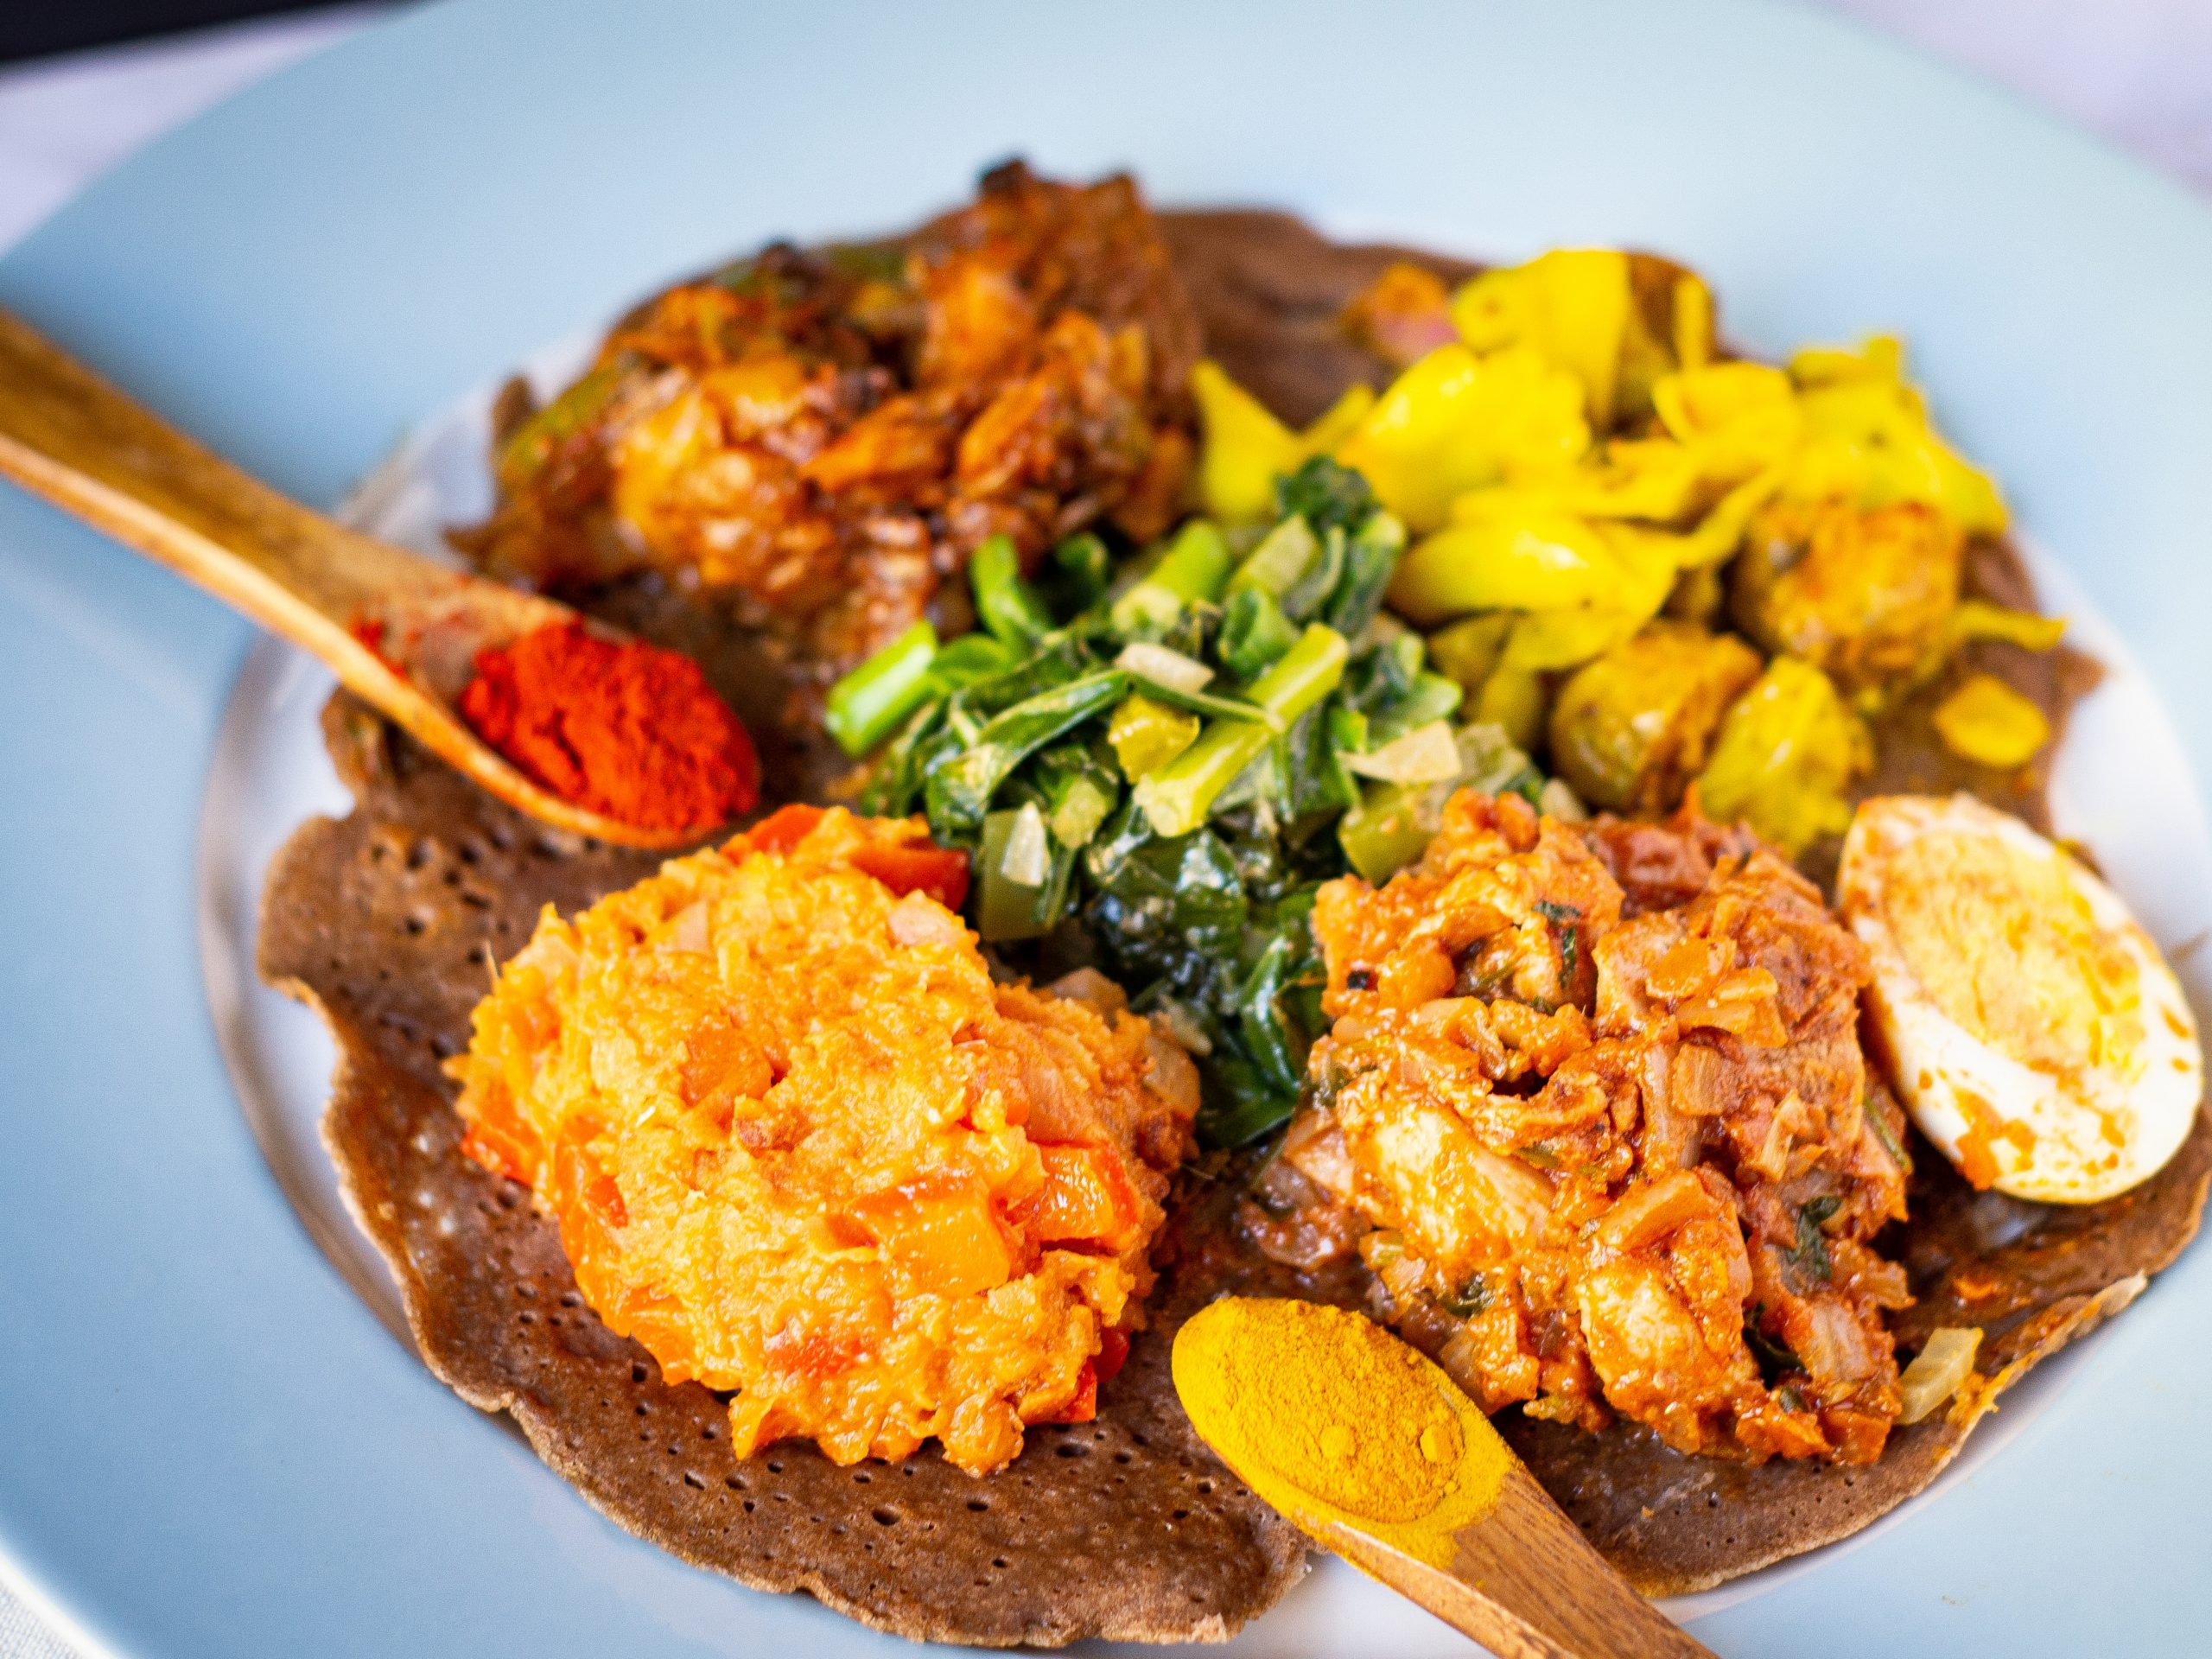 What is the most popular Ethiopian dish?